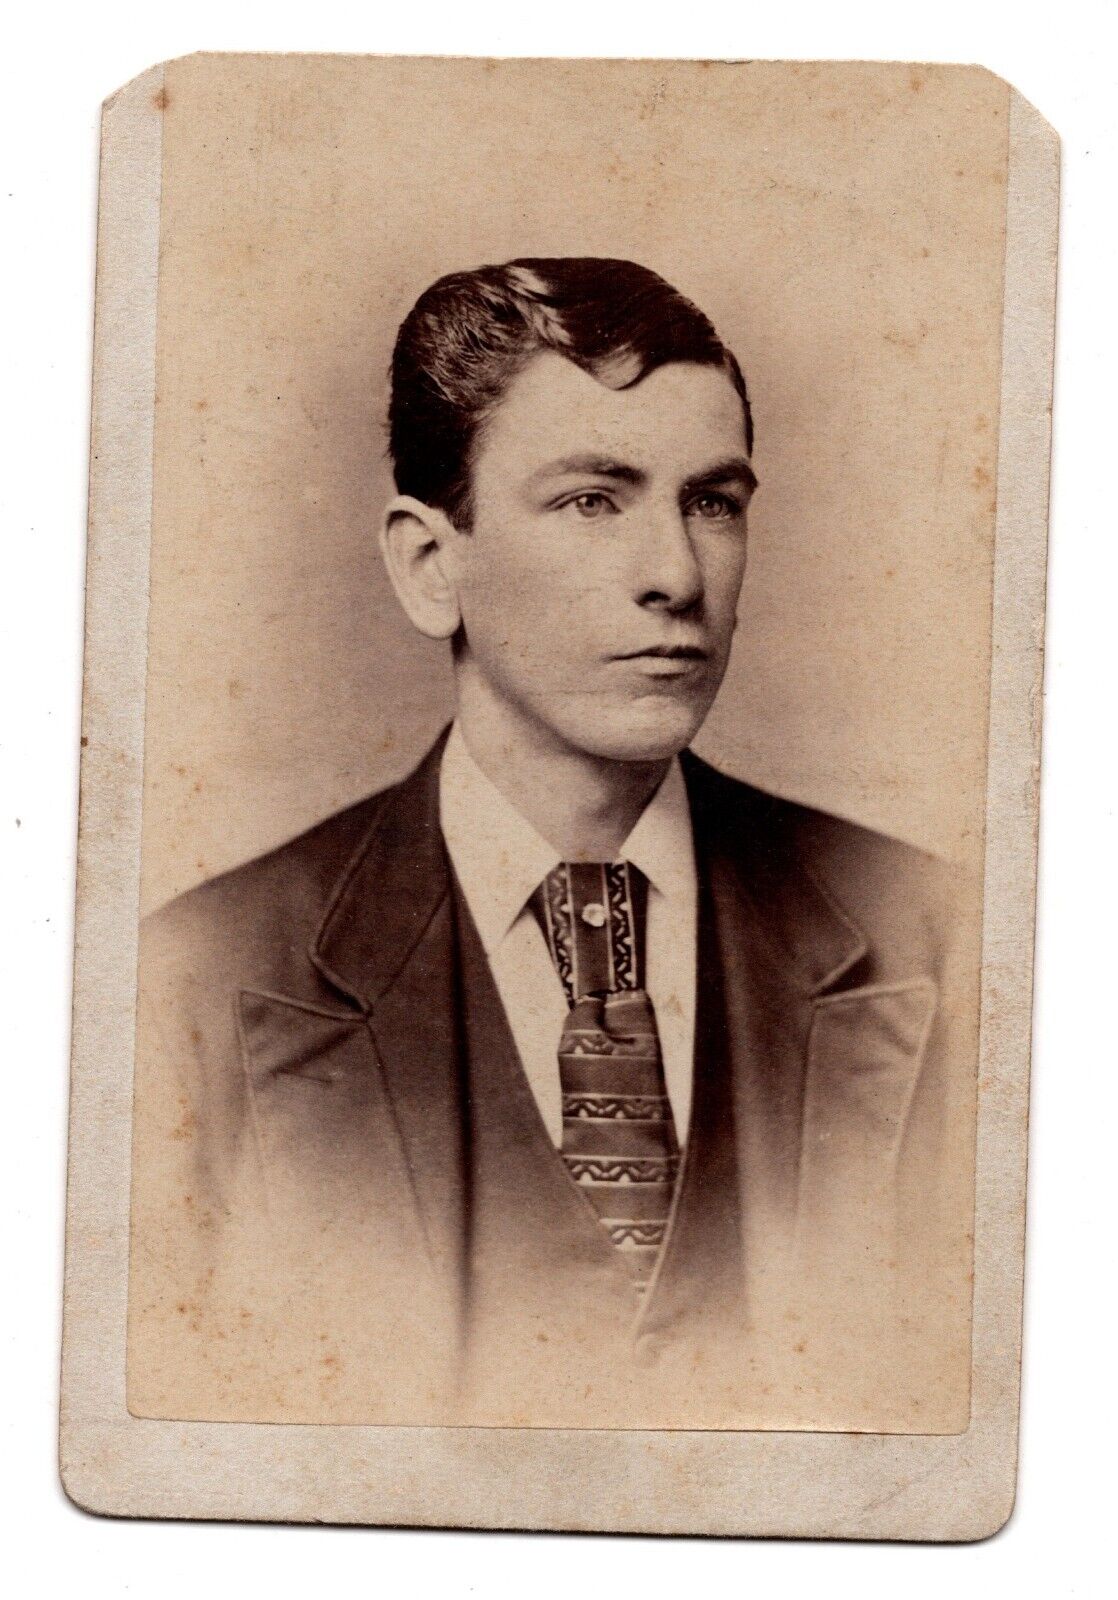 CIRCA 1880s CDV PRIOR BROS HANDSOME YOUNG MAN IN SUIT PROVIDENCE RHODE ISLAND